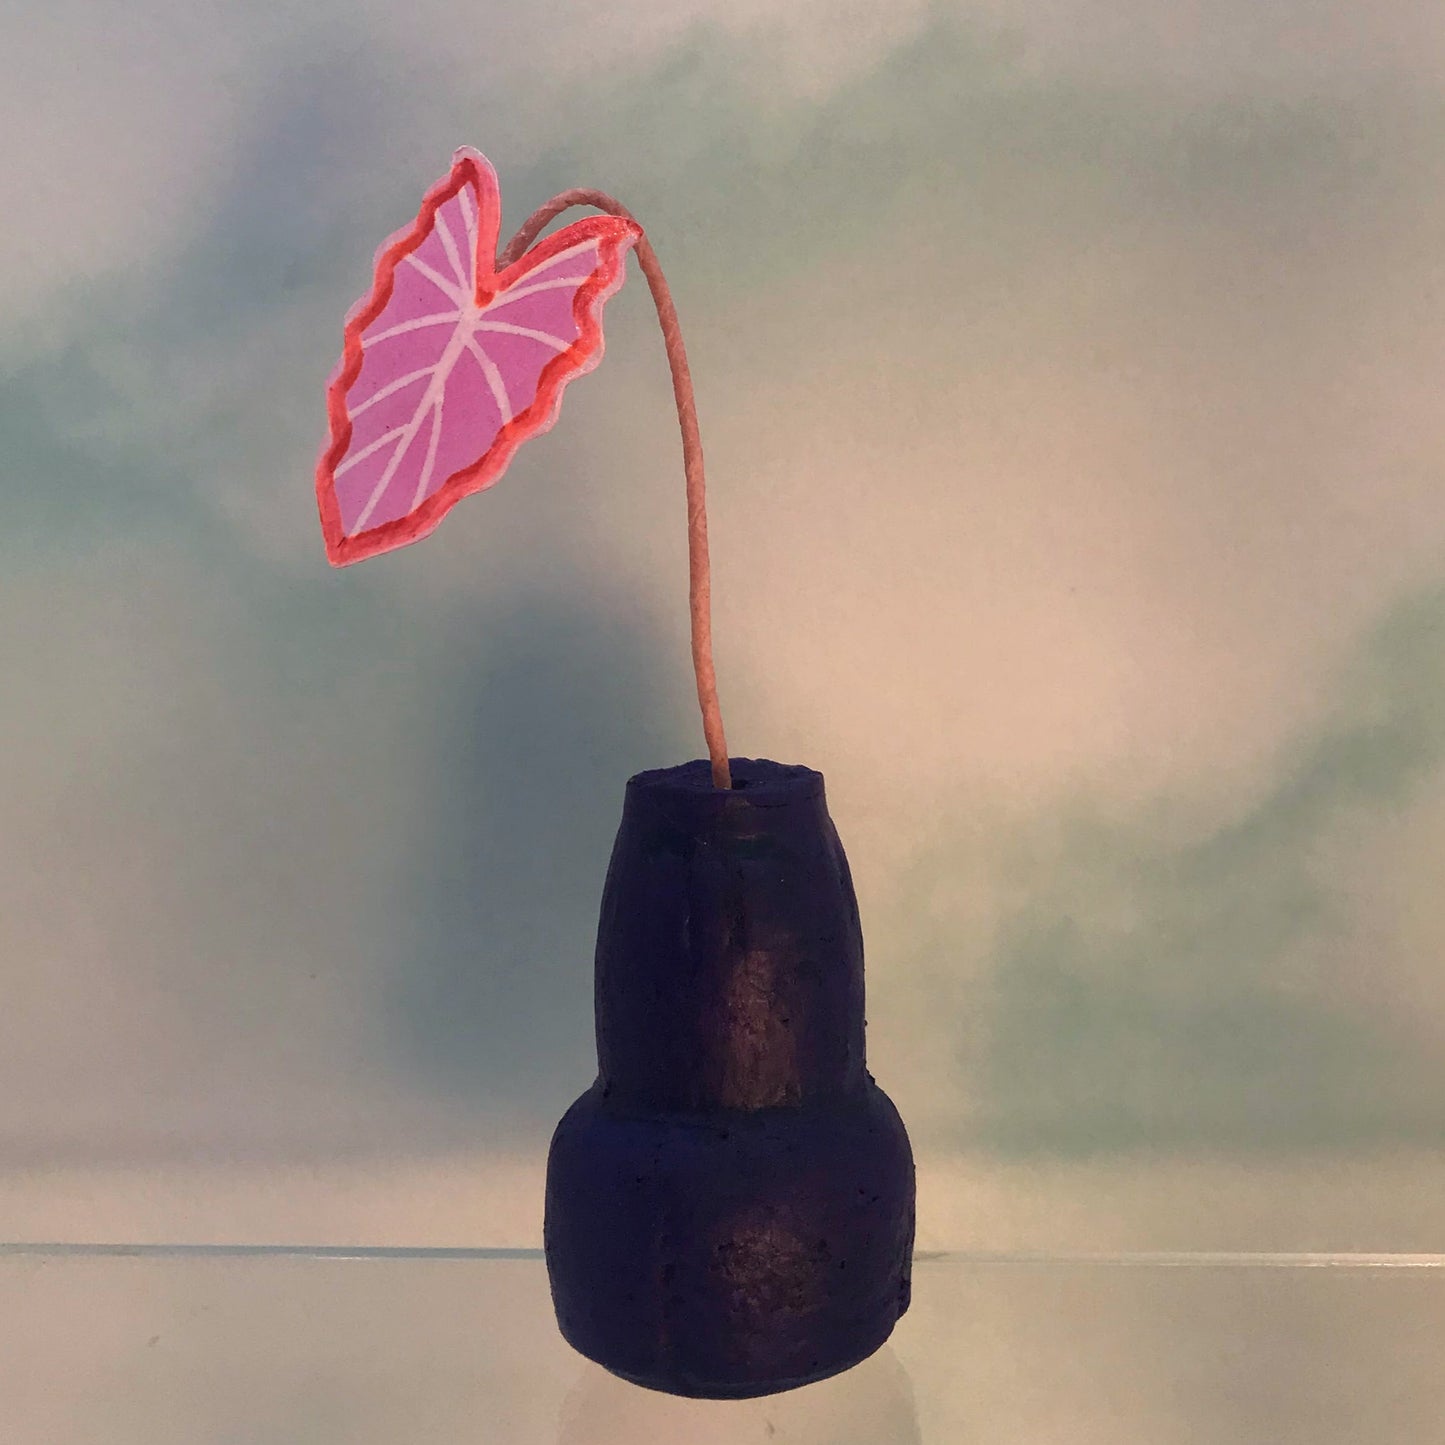 Tiny Magical Paper House Plant in Upcycled Painted Cork - DECORATIVE MAGNET